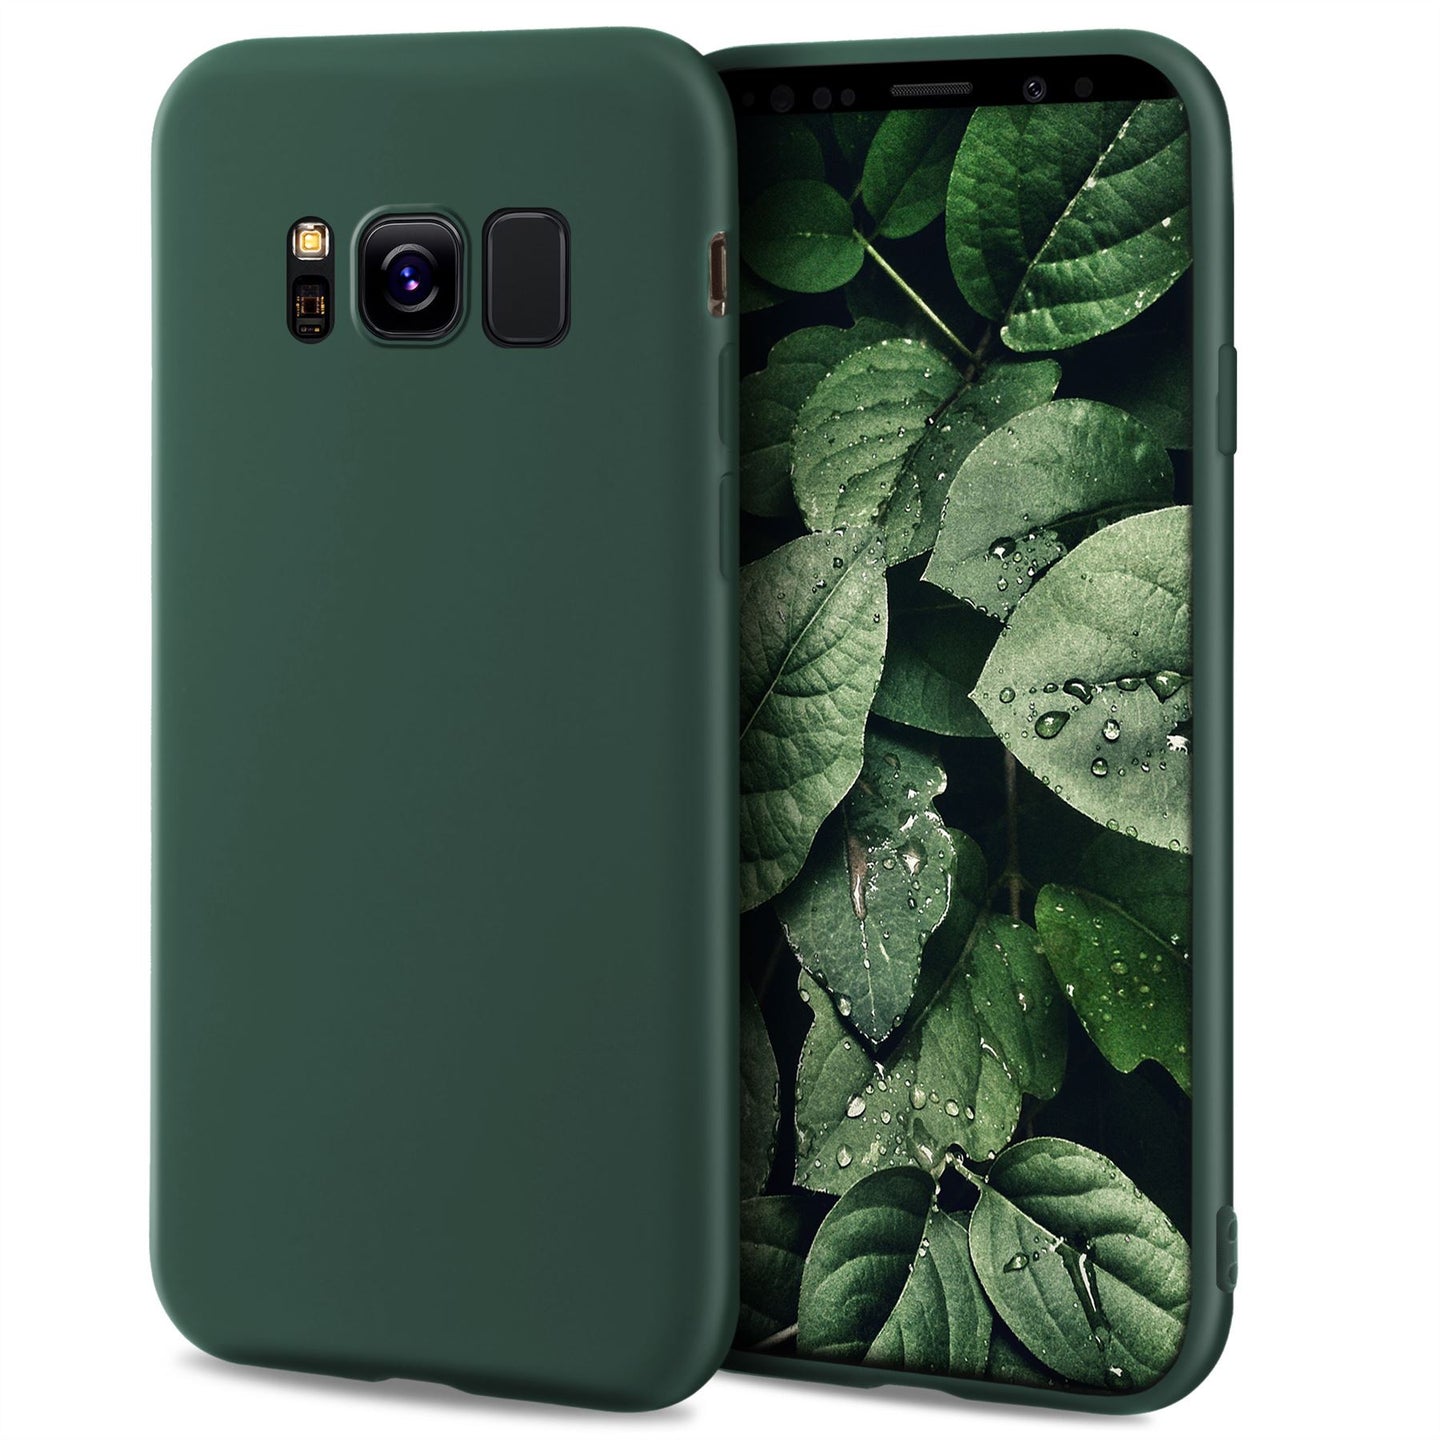 Moozy Minimalist Series Silicone Case for Samsung S8, Midnight Green - Matte Finish Slim Soft TPU Cover